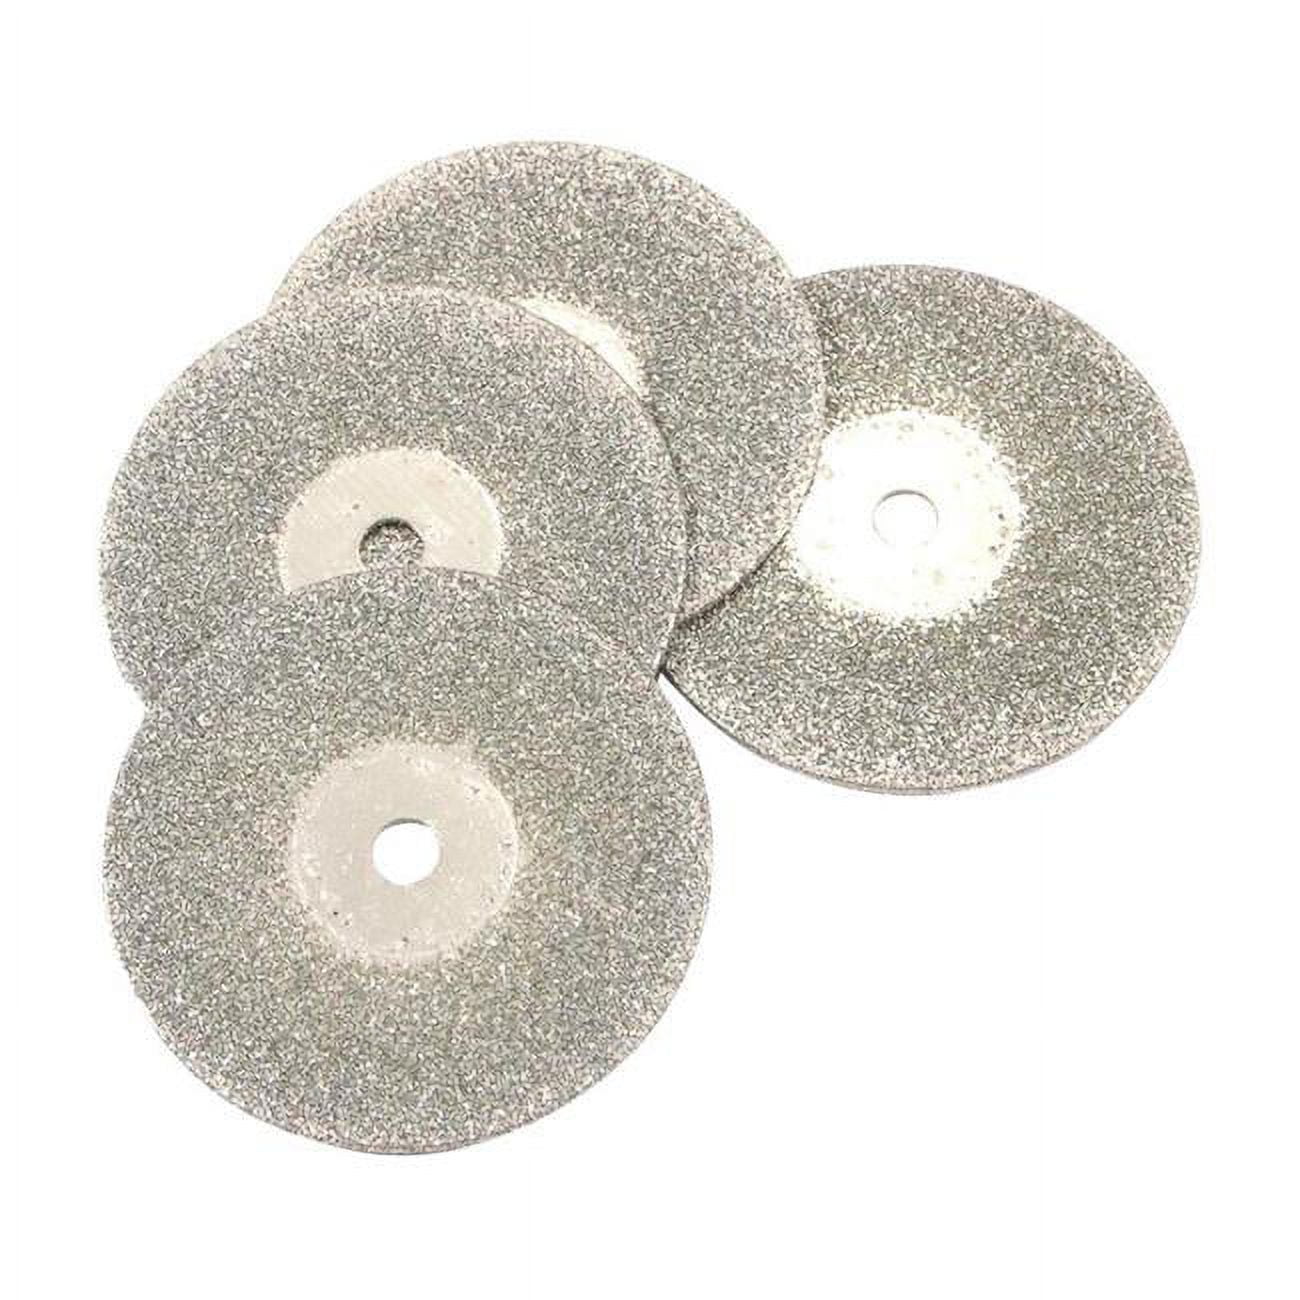 2839660 0.75 In. Diamond Replacement Cut-off Wheel - 10000 Rpm - 4 Piece